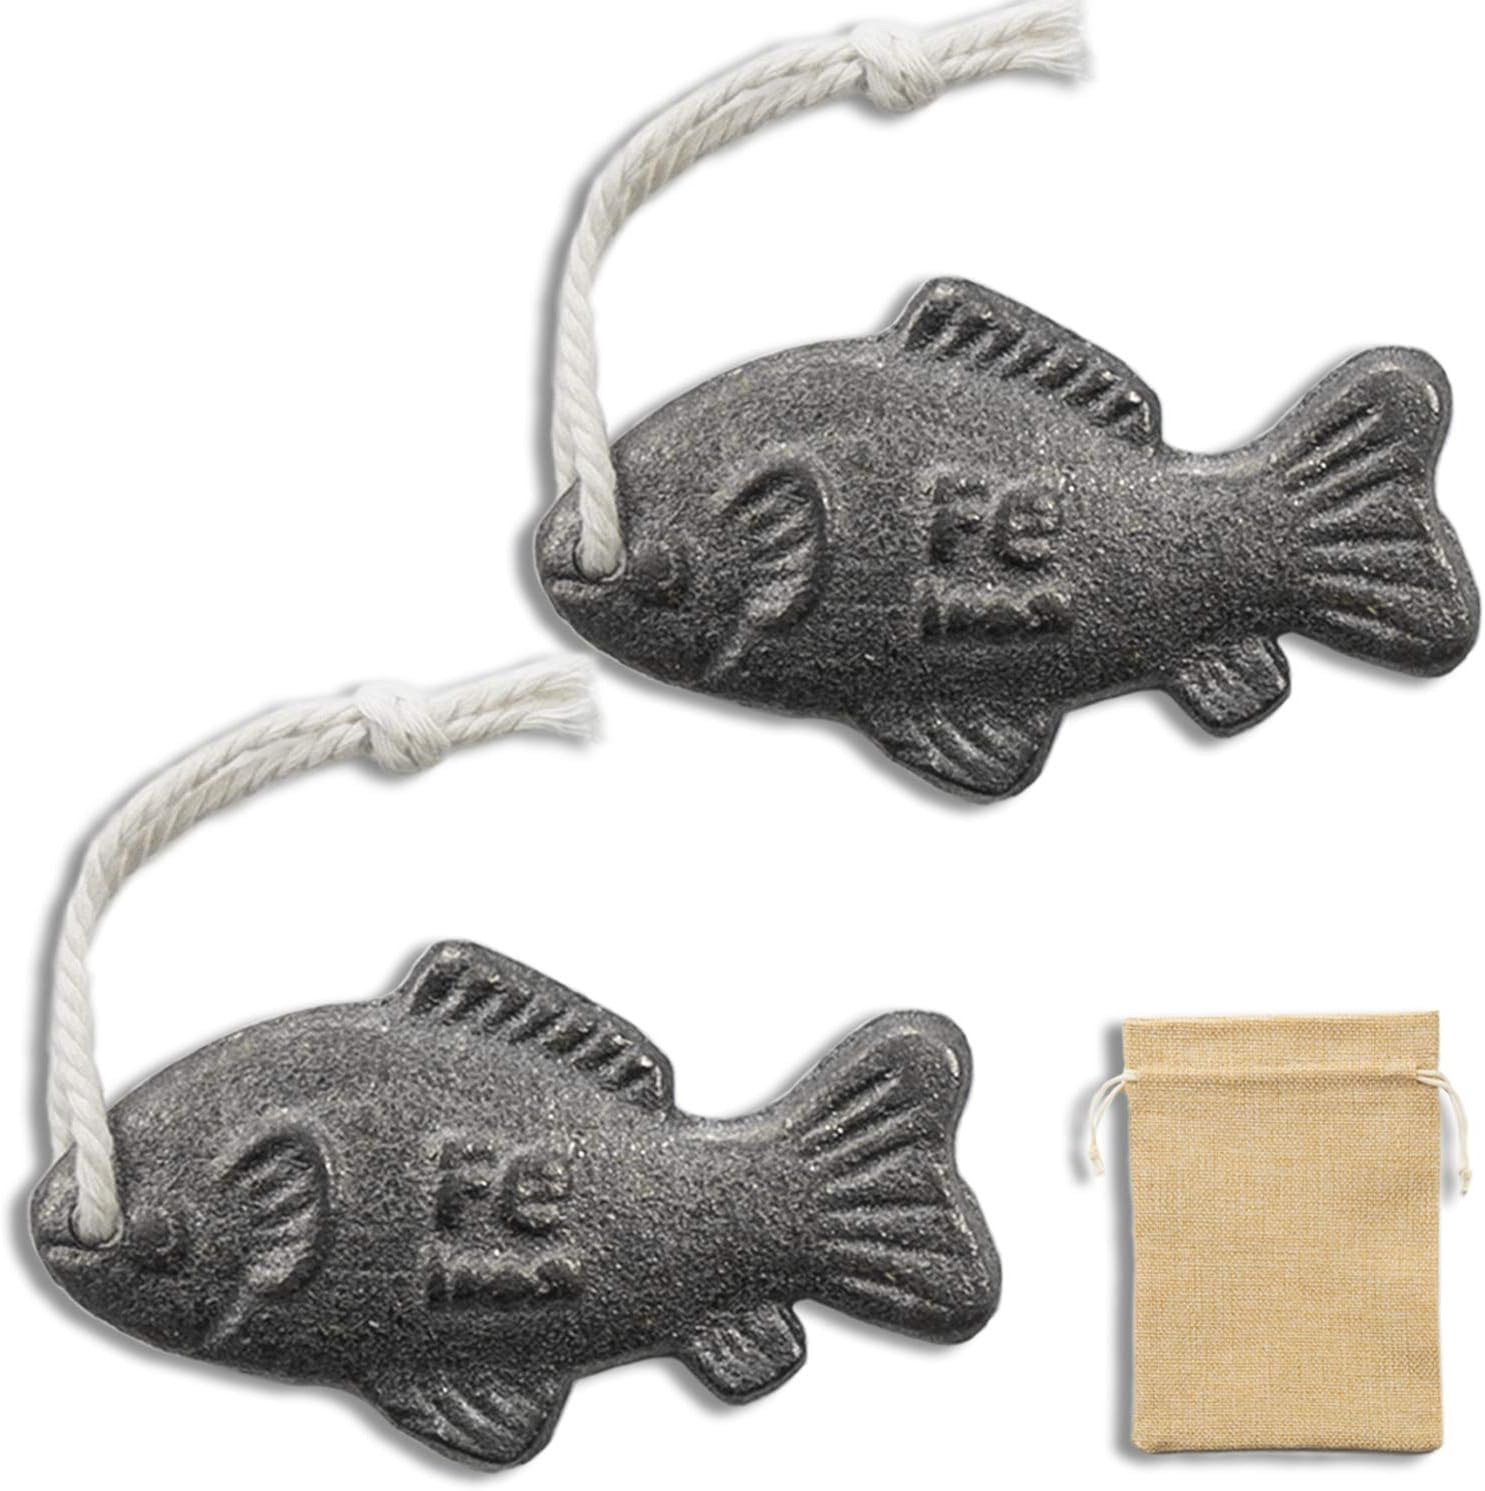 YOUIN 2 Packs of Iron Fish with Bag-A Natural Source of Iron to Reduce the Risk 